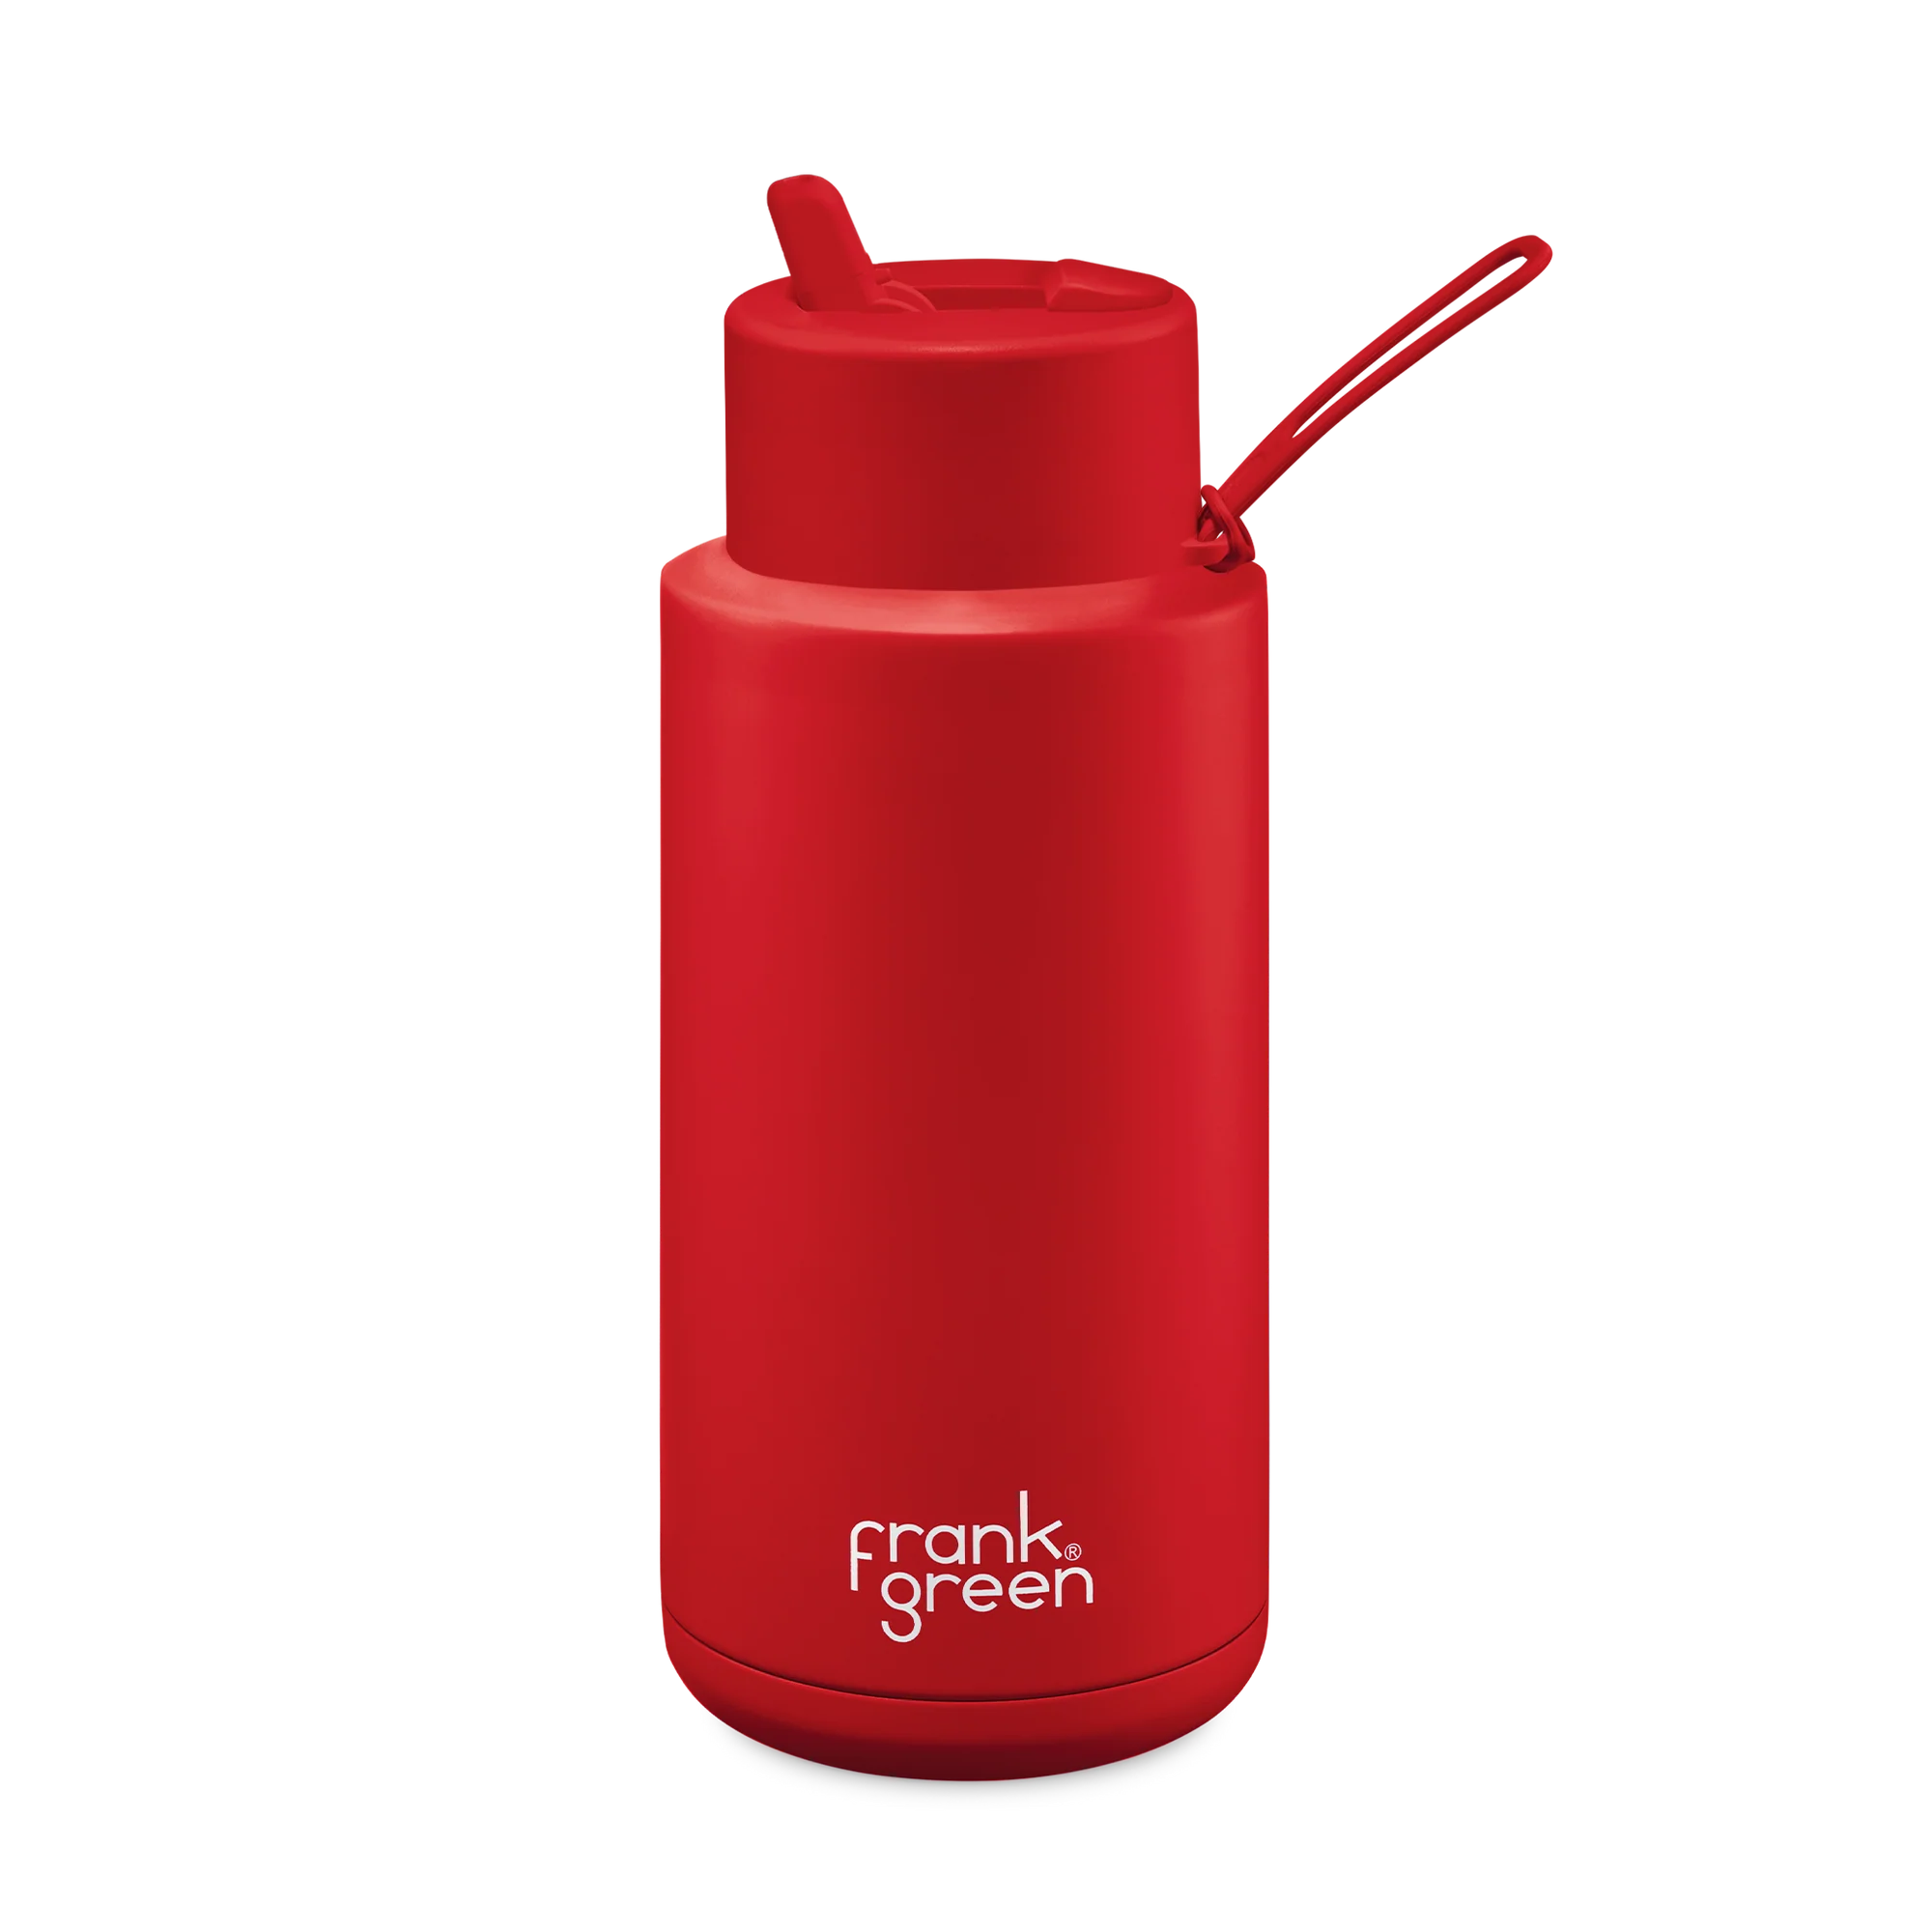 Frank Green Stainless Steel Ceramic Reusable Bottle Atomic Red With Straw And Strap 34oz/1,000ml